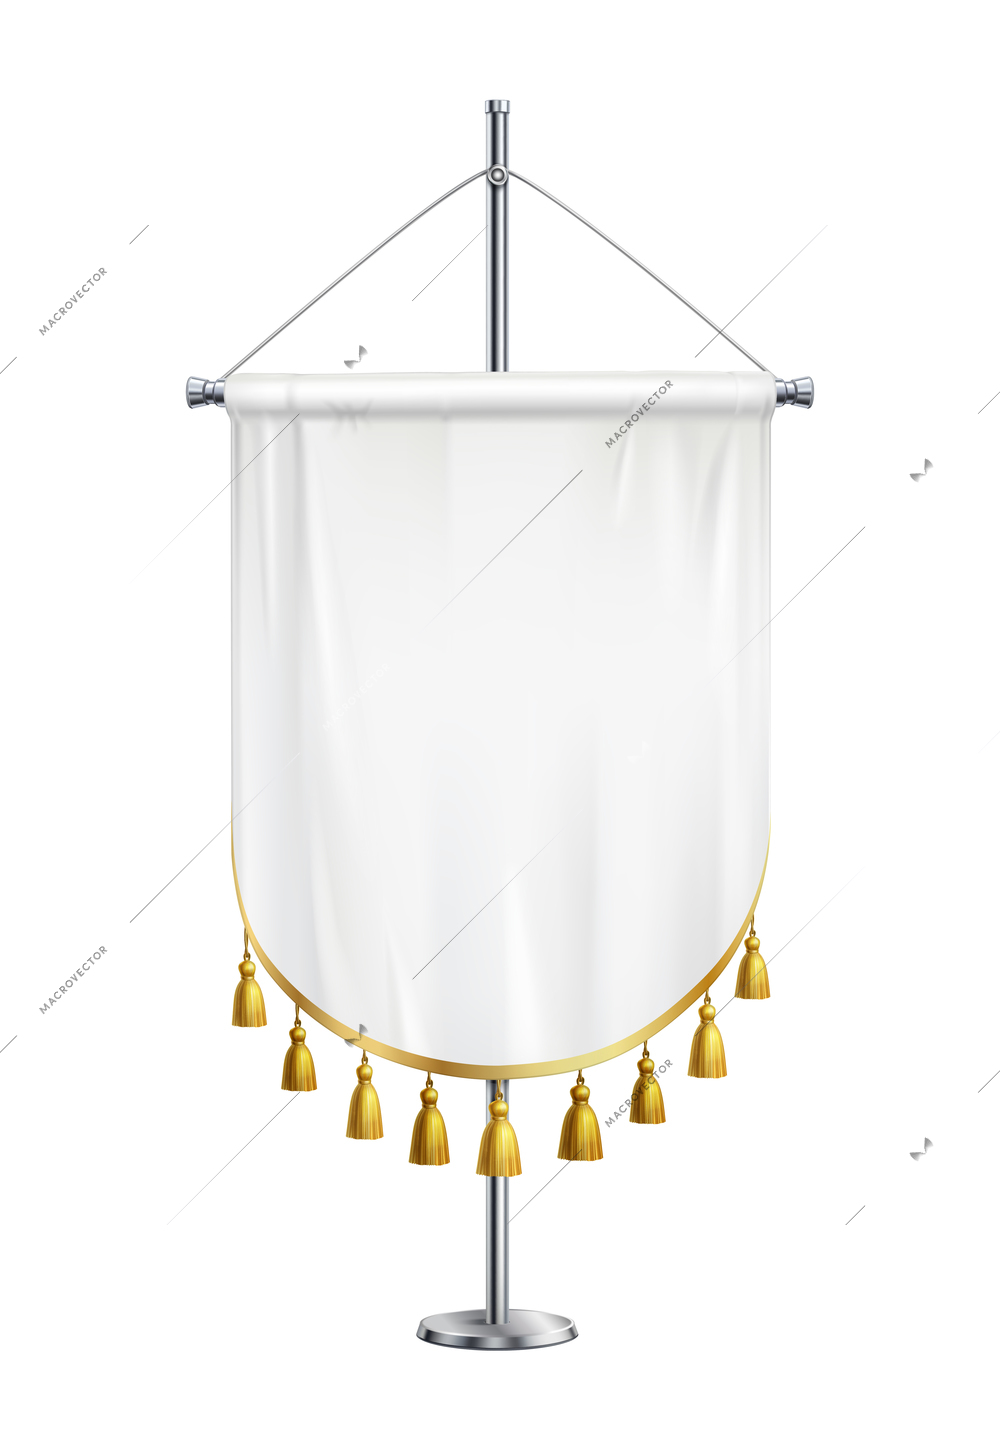 Realistic blank white pennant with golden fringe on stand vector illustration